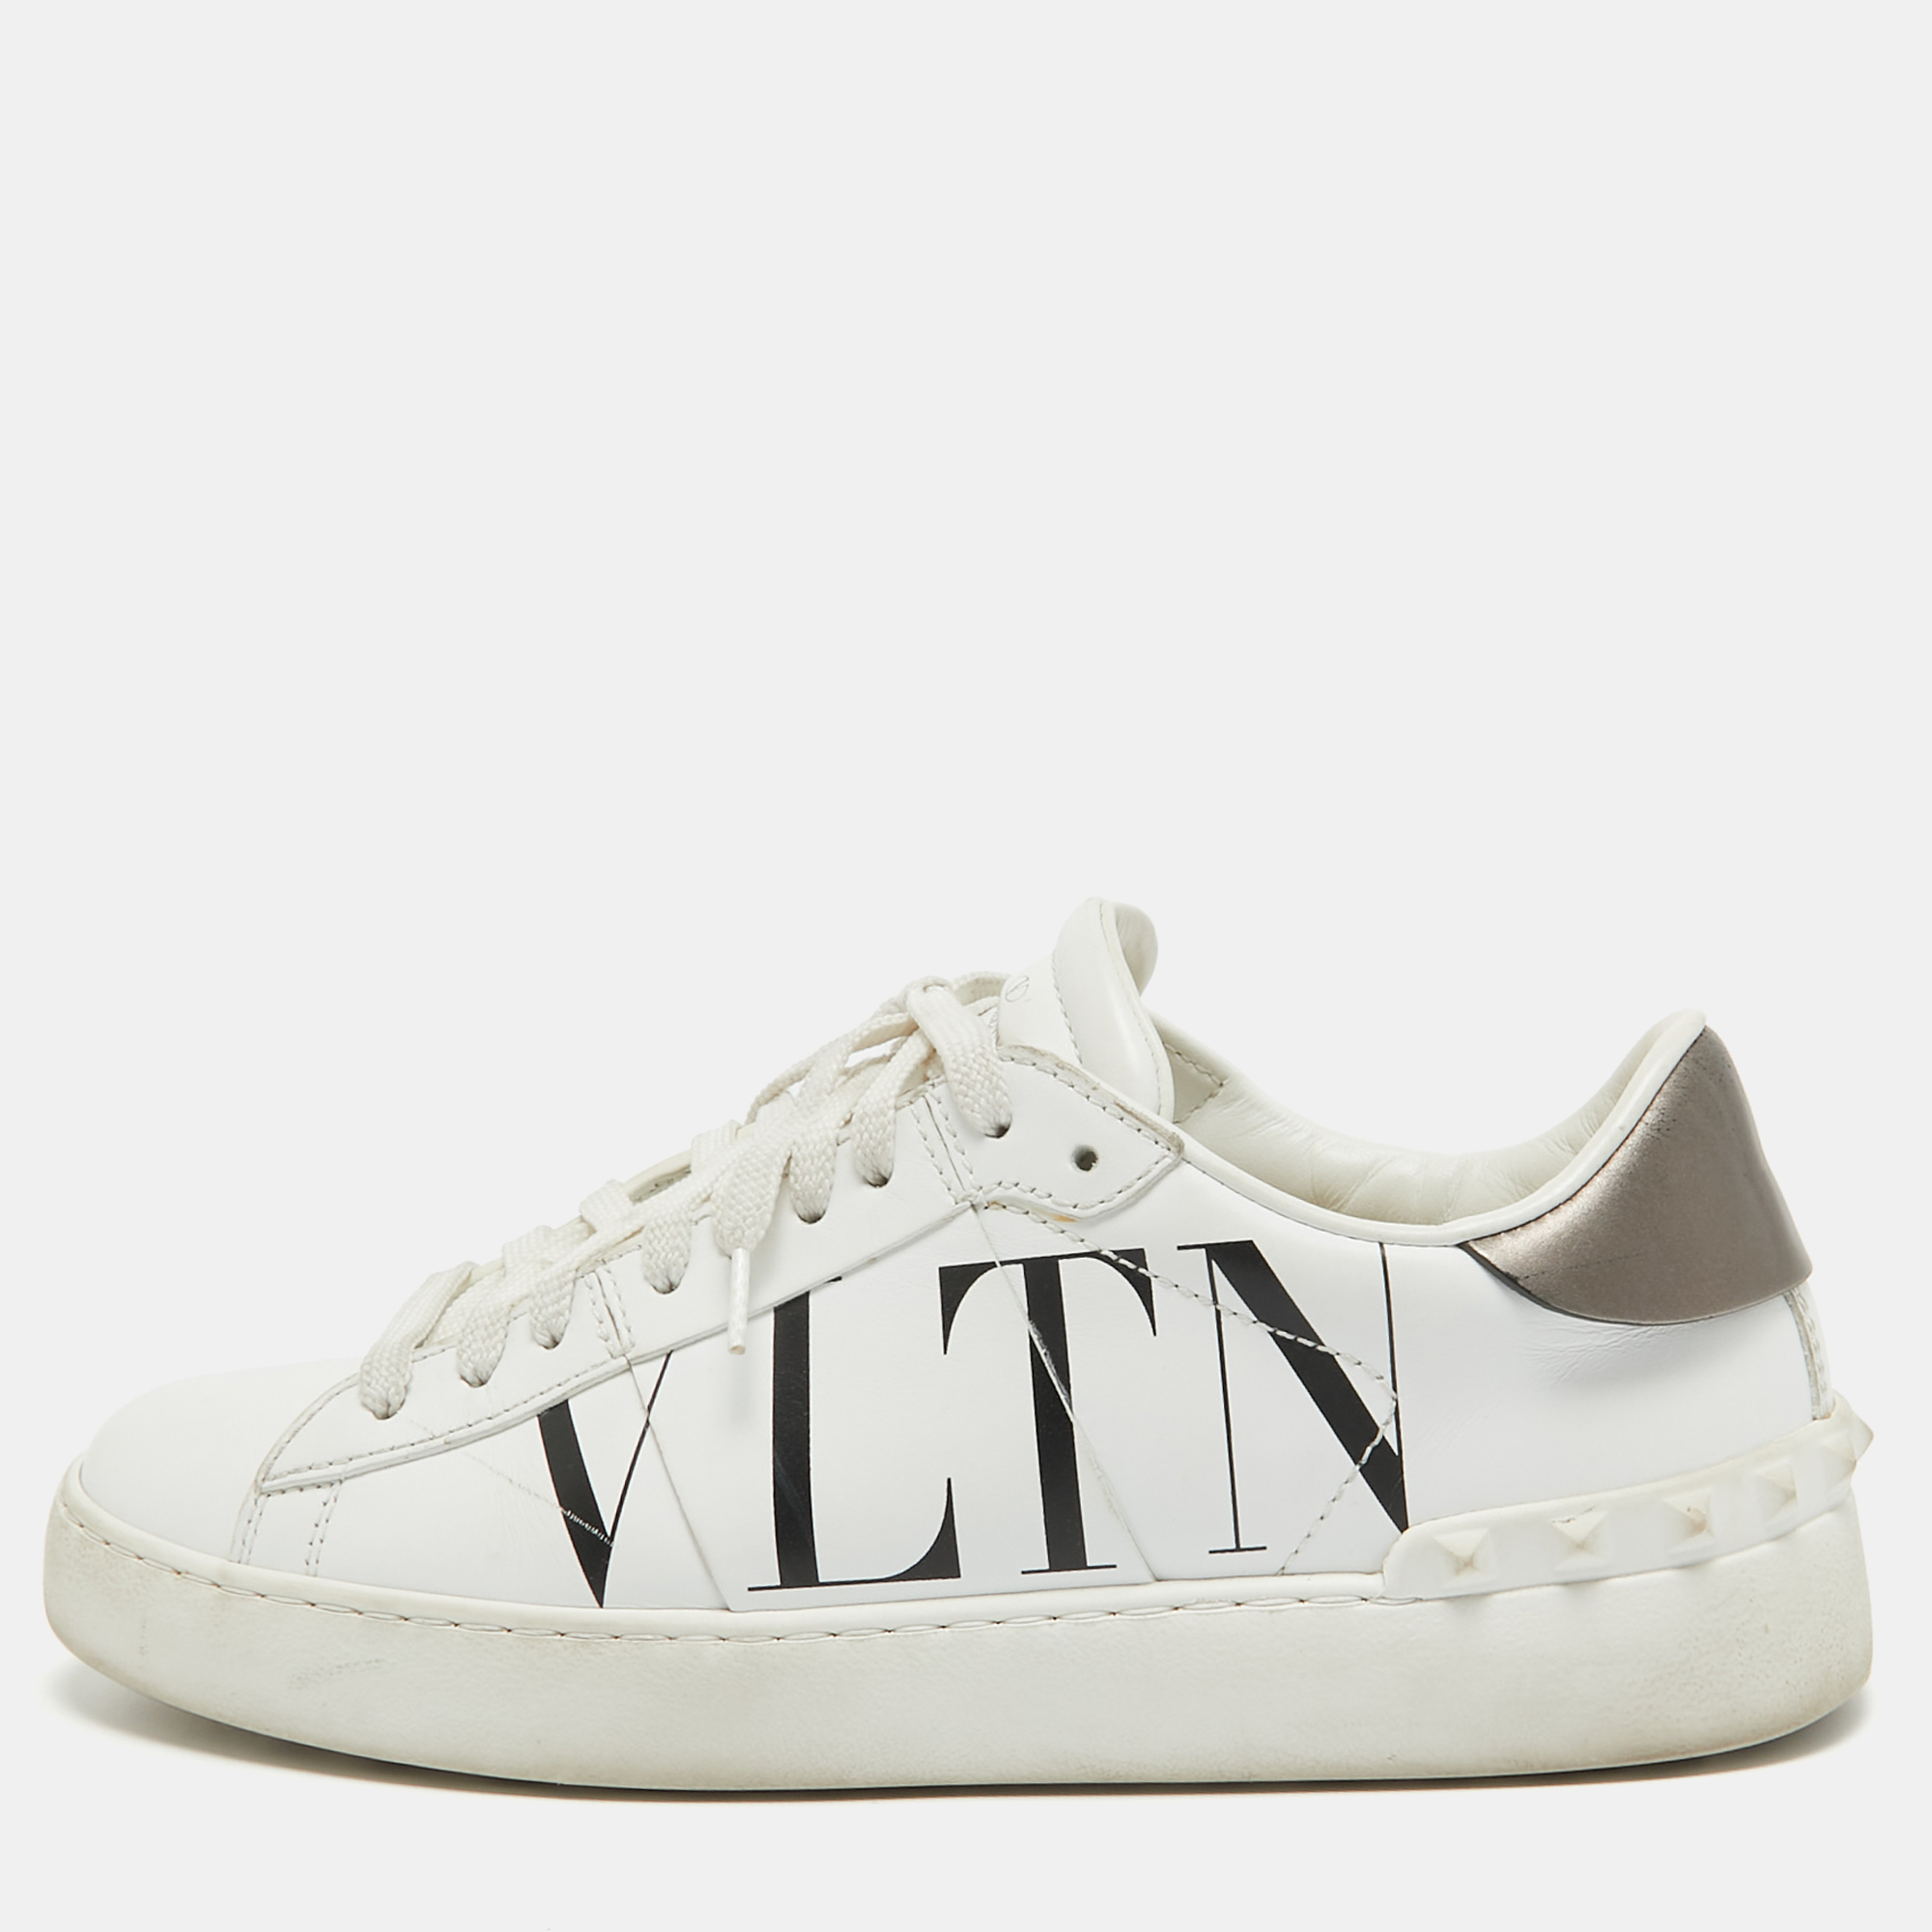 Valentino white leather vltn open sneakers size 37